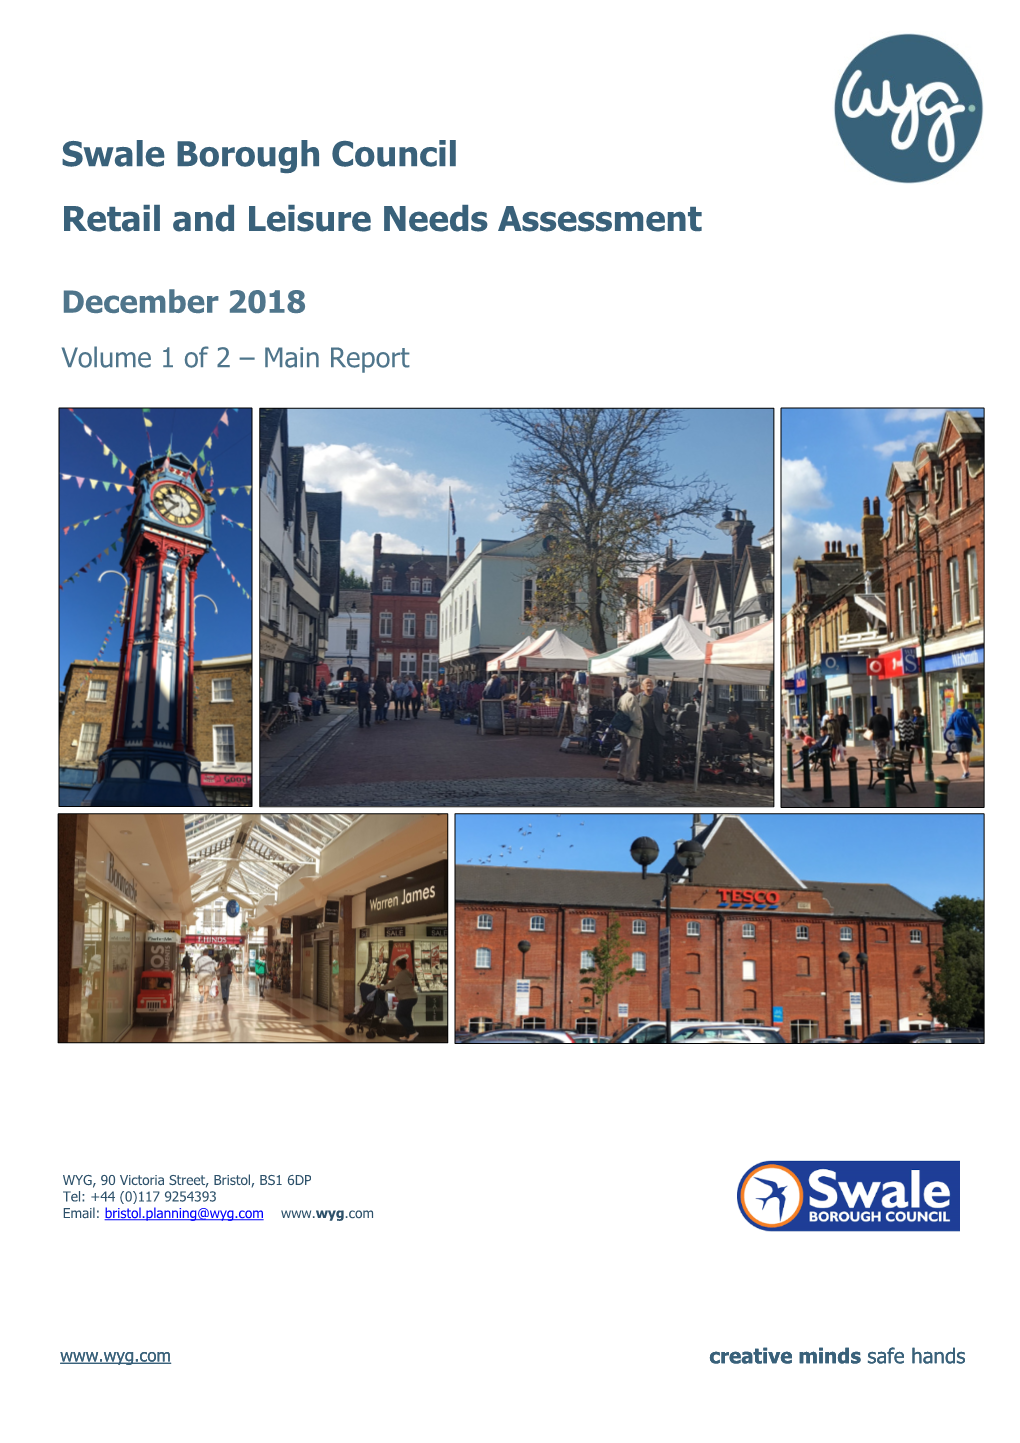 Swale Borough Council Retail and Leisure Needs Assessment